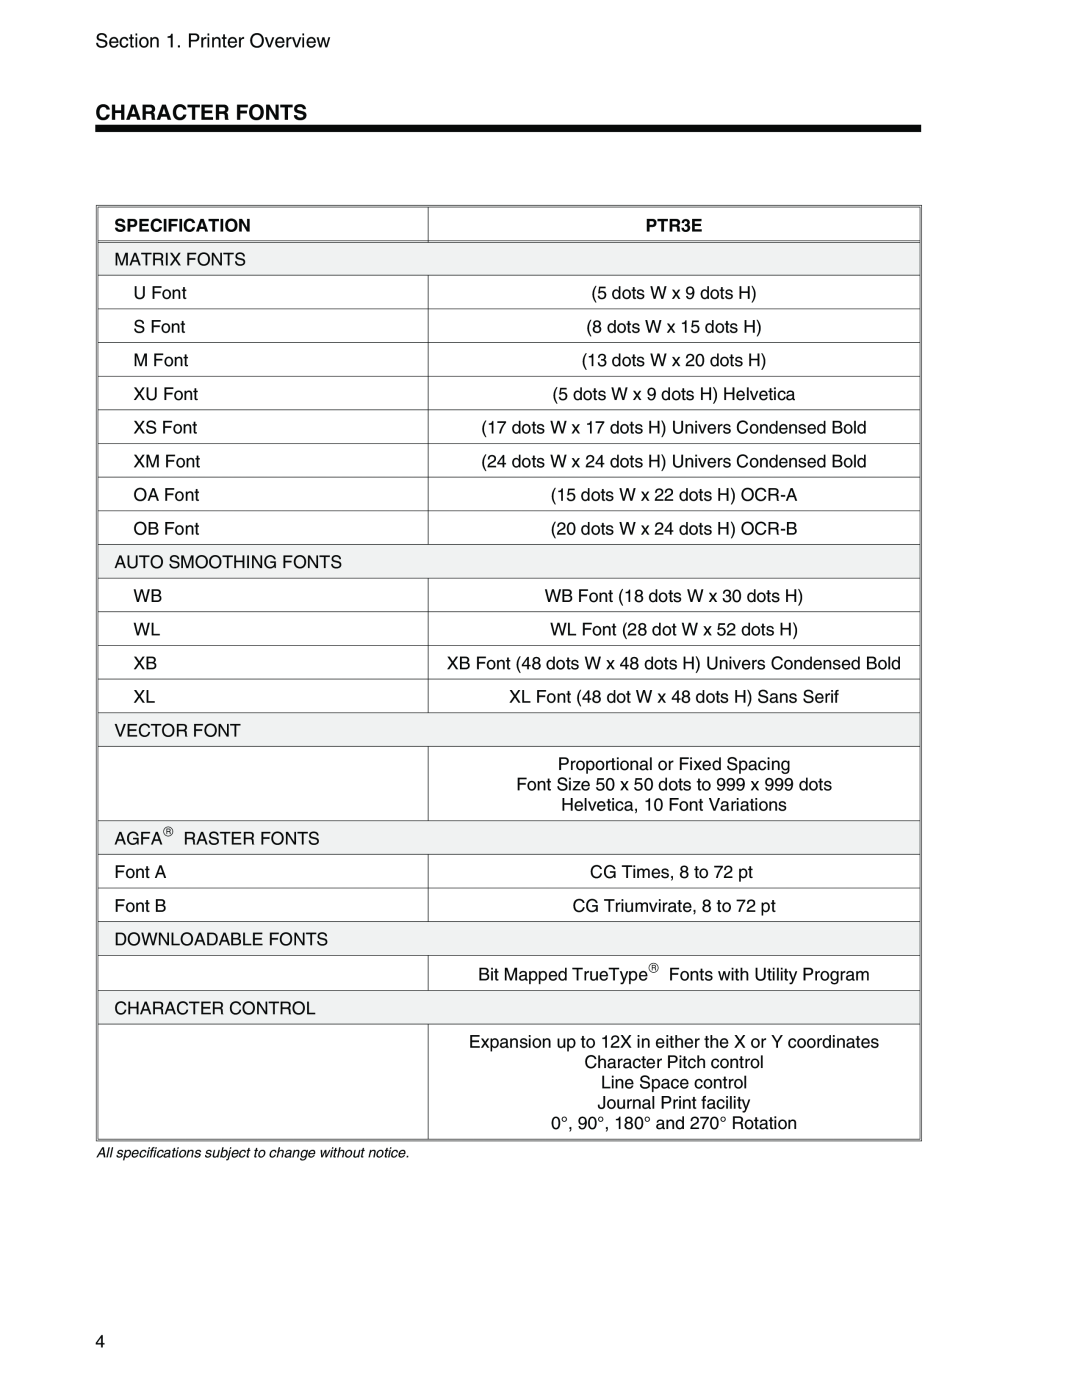 Panduit PTR3E manual Character Fonts, Printer Overview, Specification 